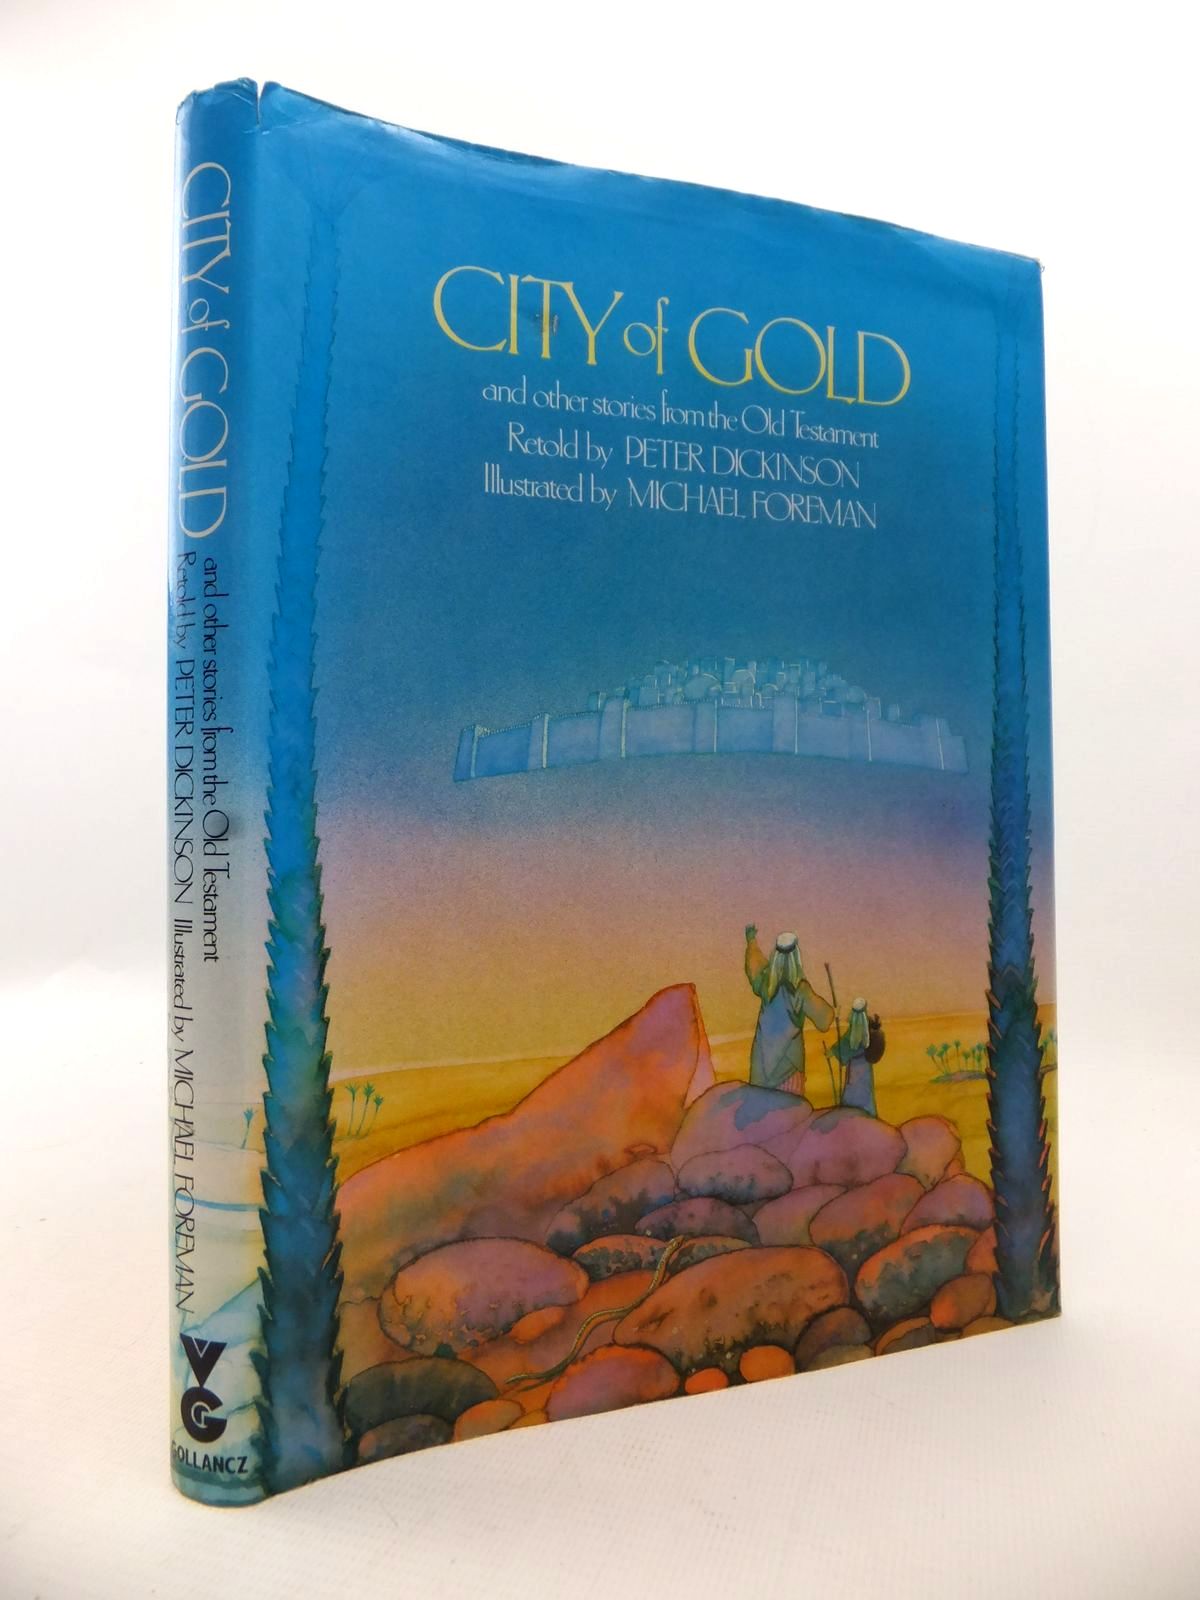 Photo of CITY OF GOLD AND OTHER STORIES FROM THE OLD TESTAMENT written by Dickinson, Peter illustrated by Foreman, Michael published by Victor Gollancz Ltd. (STOCK CODE: 1813291)  for sale by Stella & Rose's Books